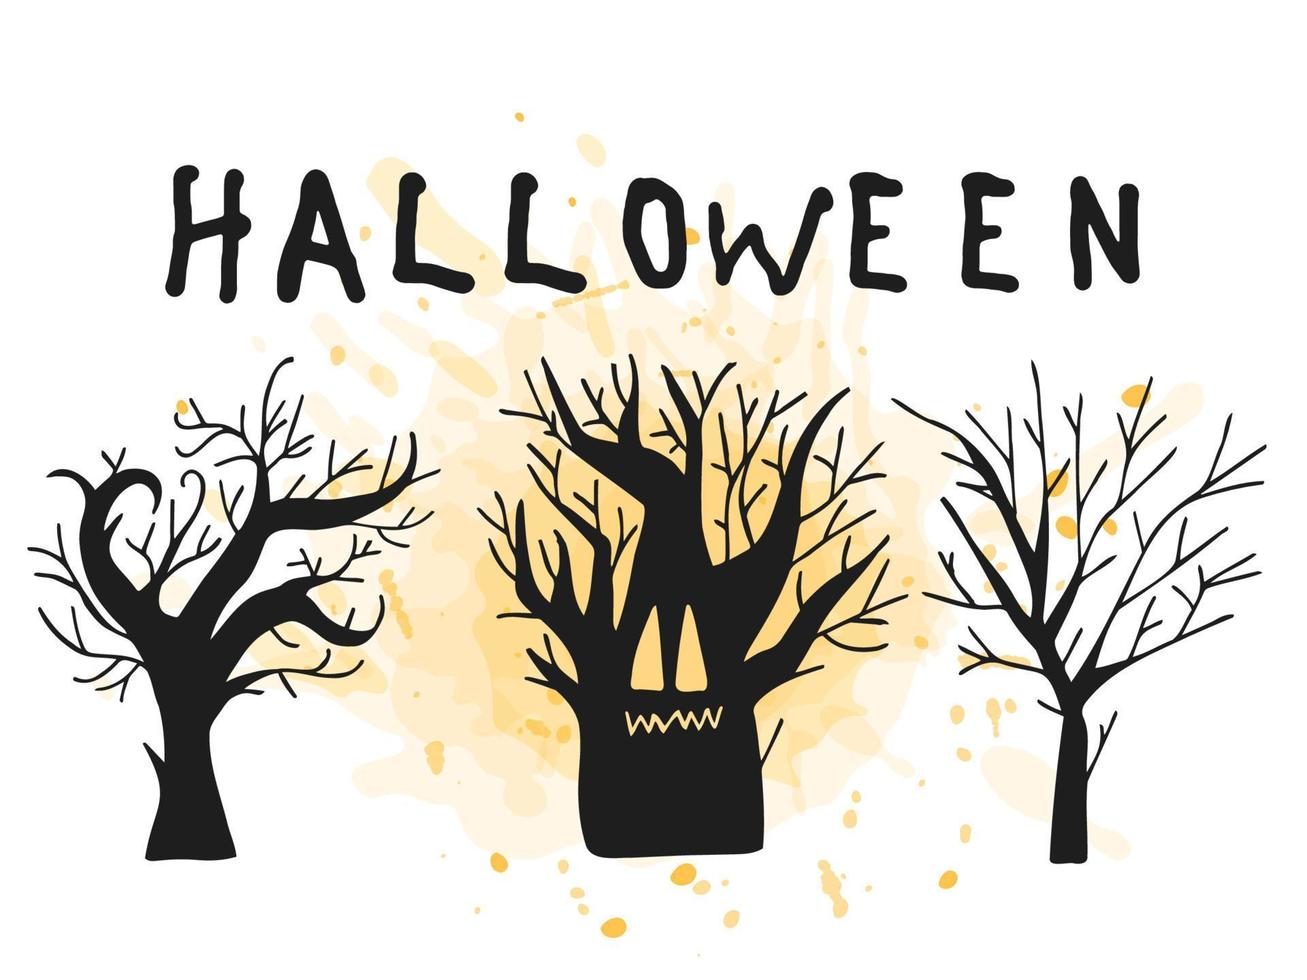 Halloween 2022 - October 31. A traditional holiday. Trick or treat. Vector illustration in hand-drawn doodle style. Set of silhouettes of scary trees with an orange watercolor spot.